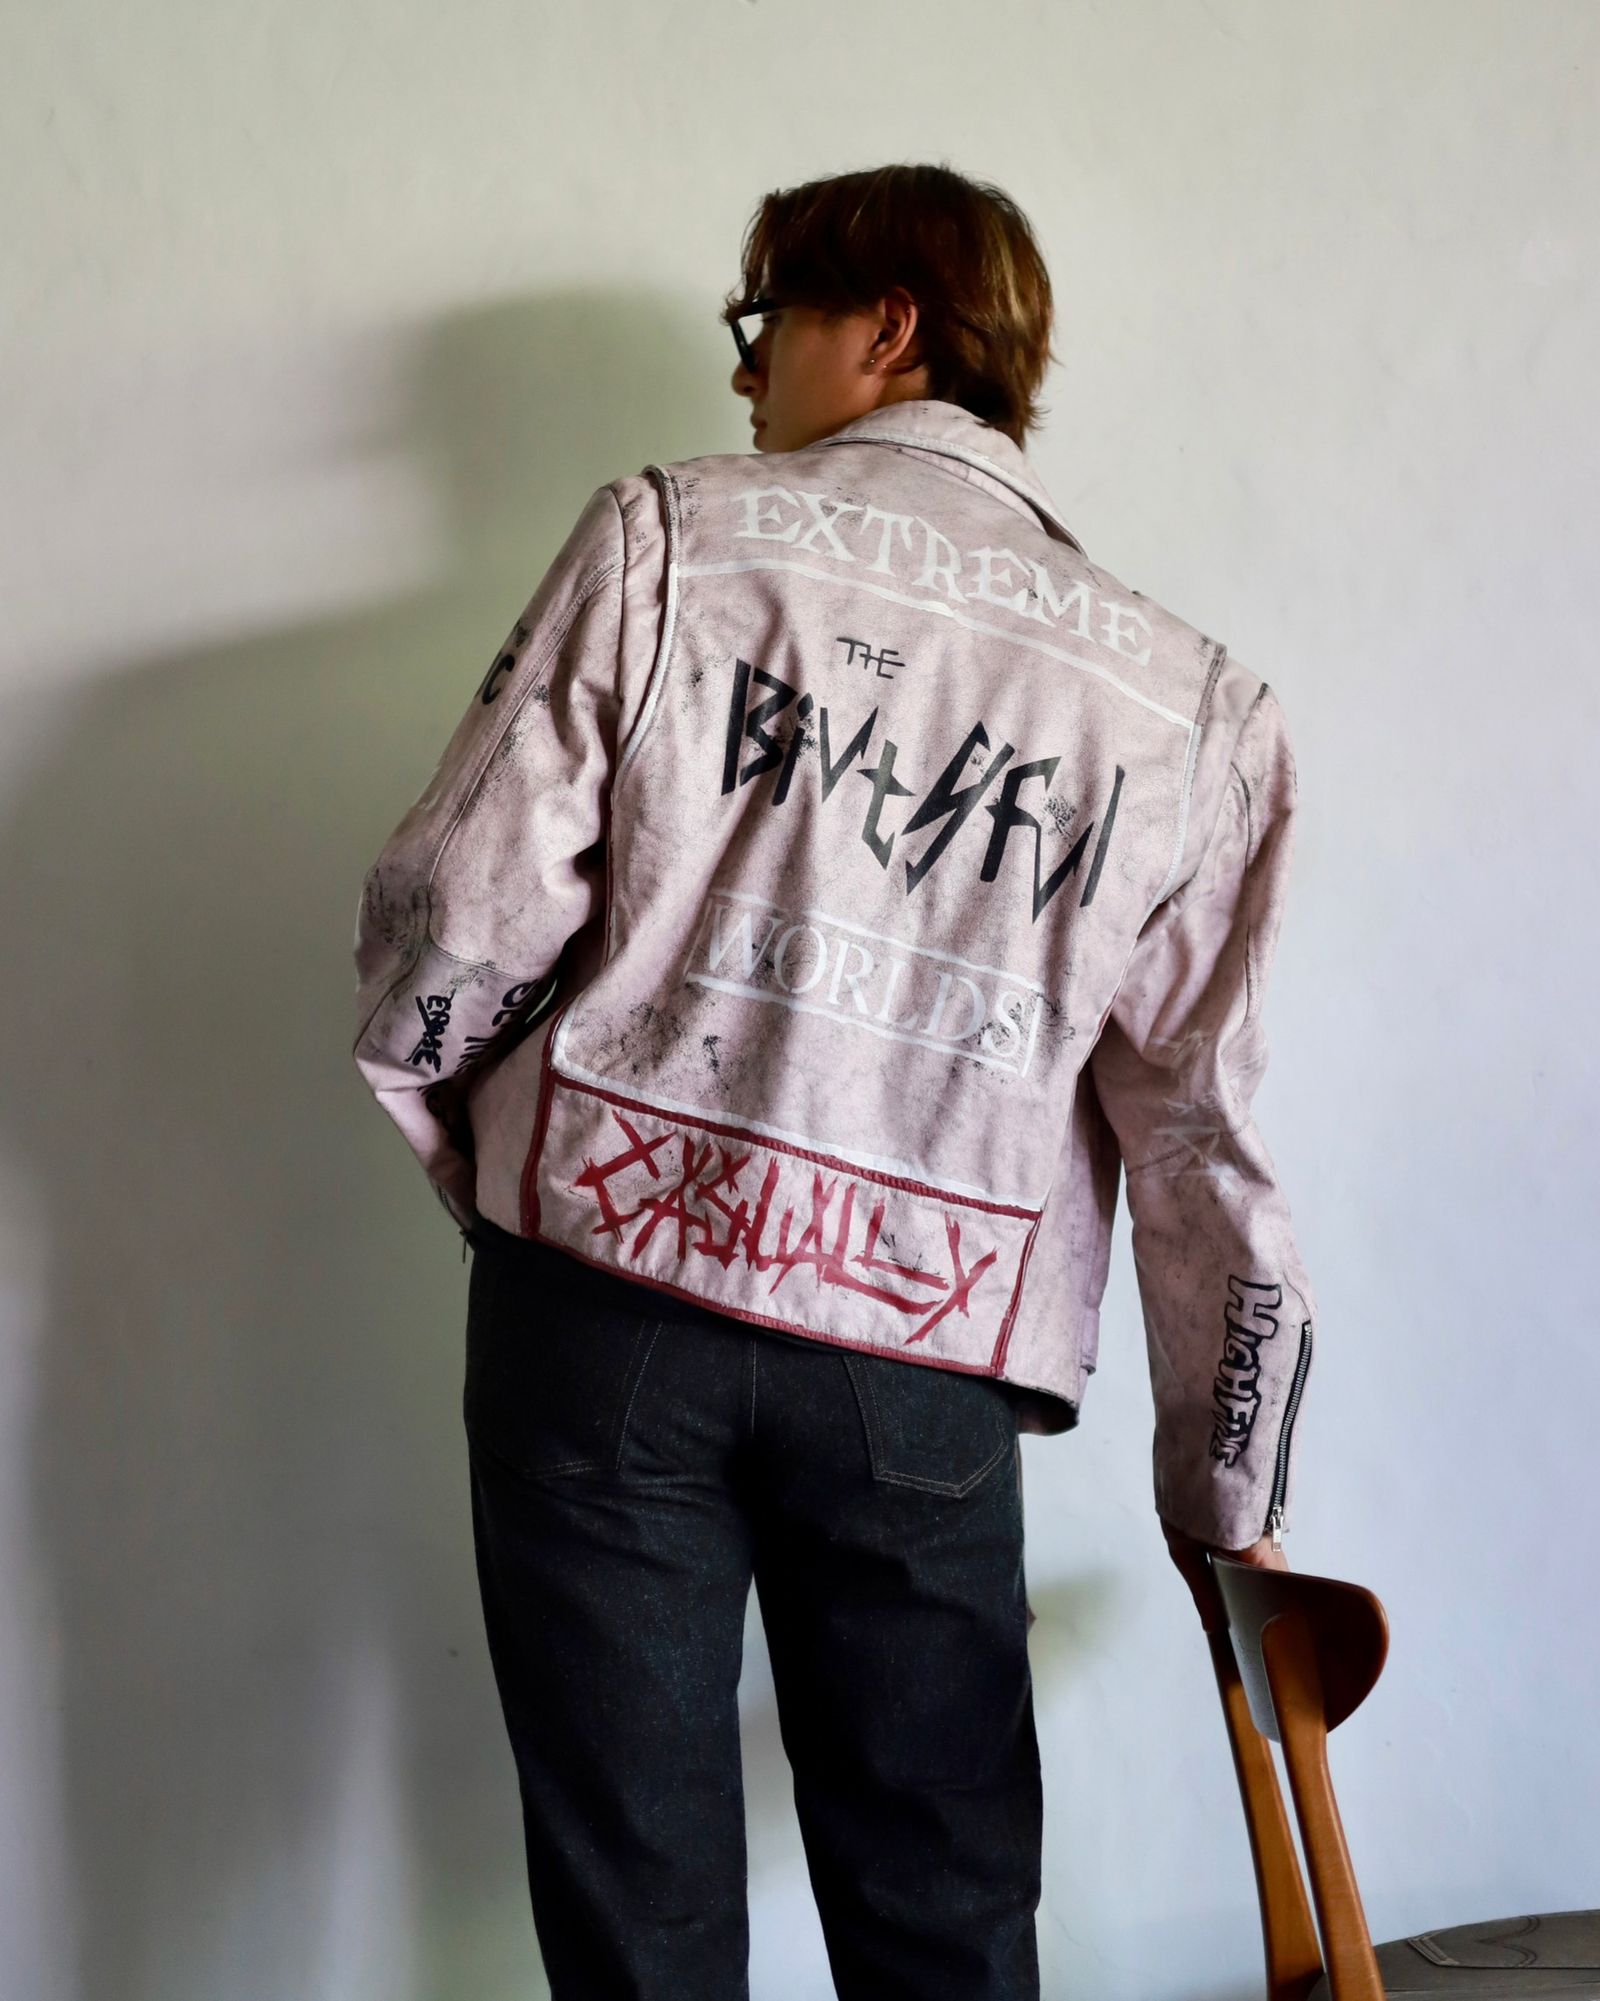 doublet ダブレットHAND-PAINTED RIDER'S JACKET